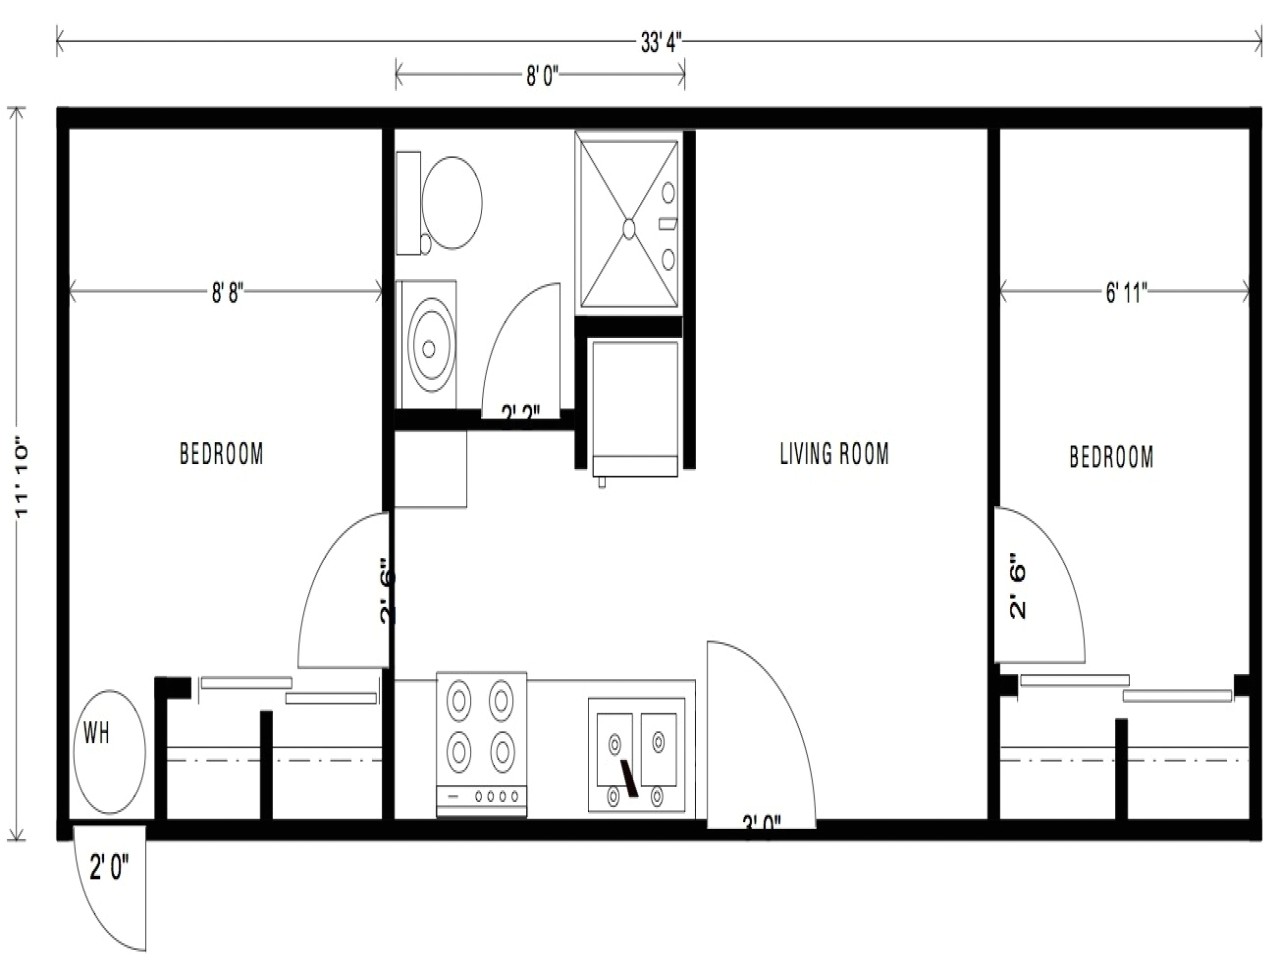 Small Portable Home Plans Tiny House On Wheels Floor Plans Www Imgkid Com the